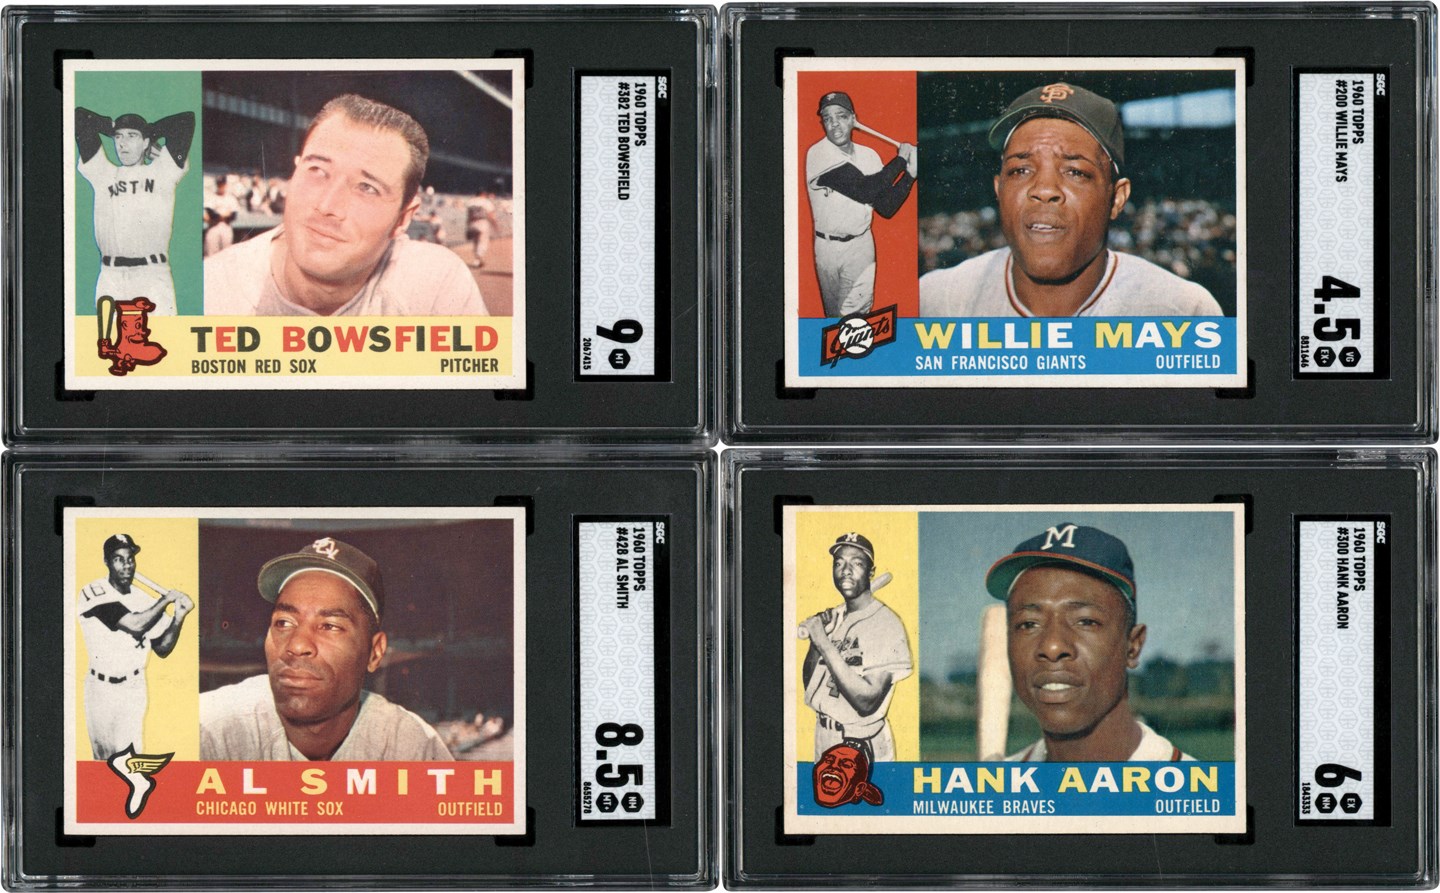 - High Grade 1960 Topps Baseball Card Collection w/Mays & Aaron (158) w/SGC